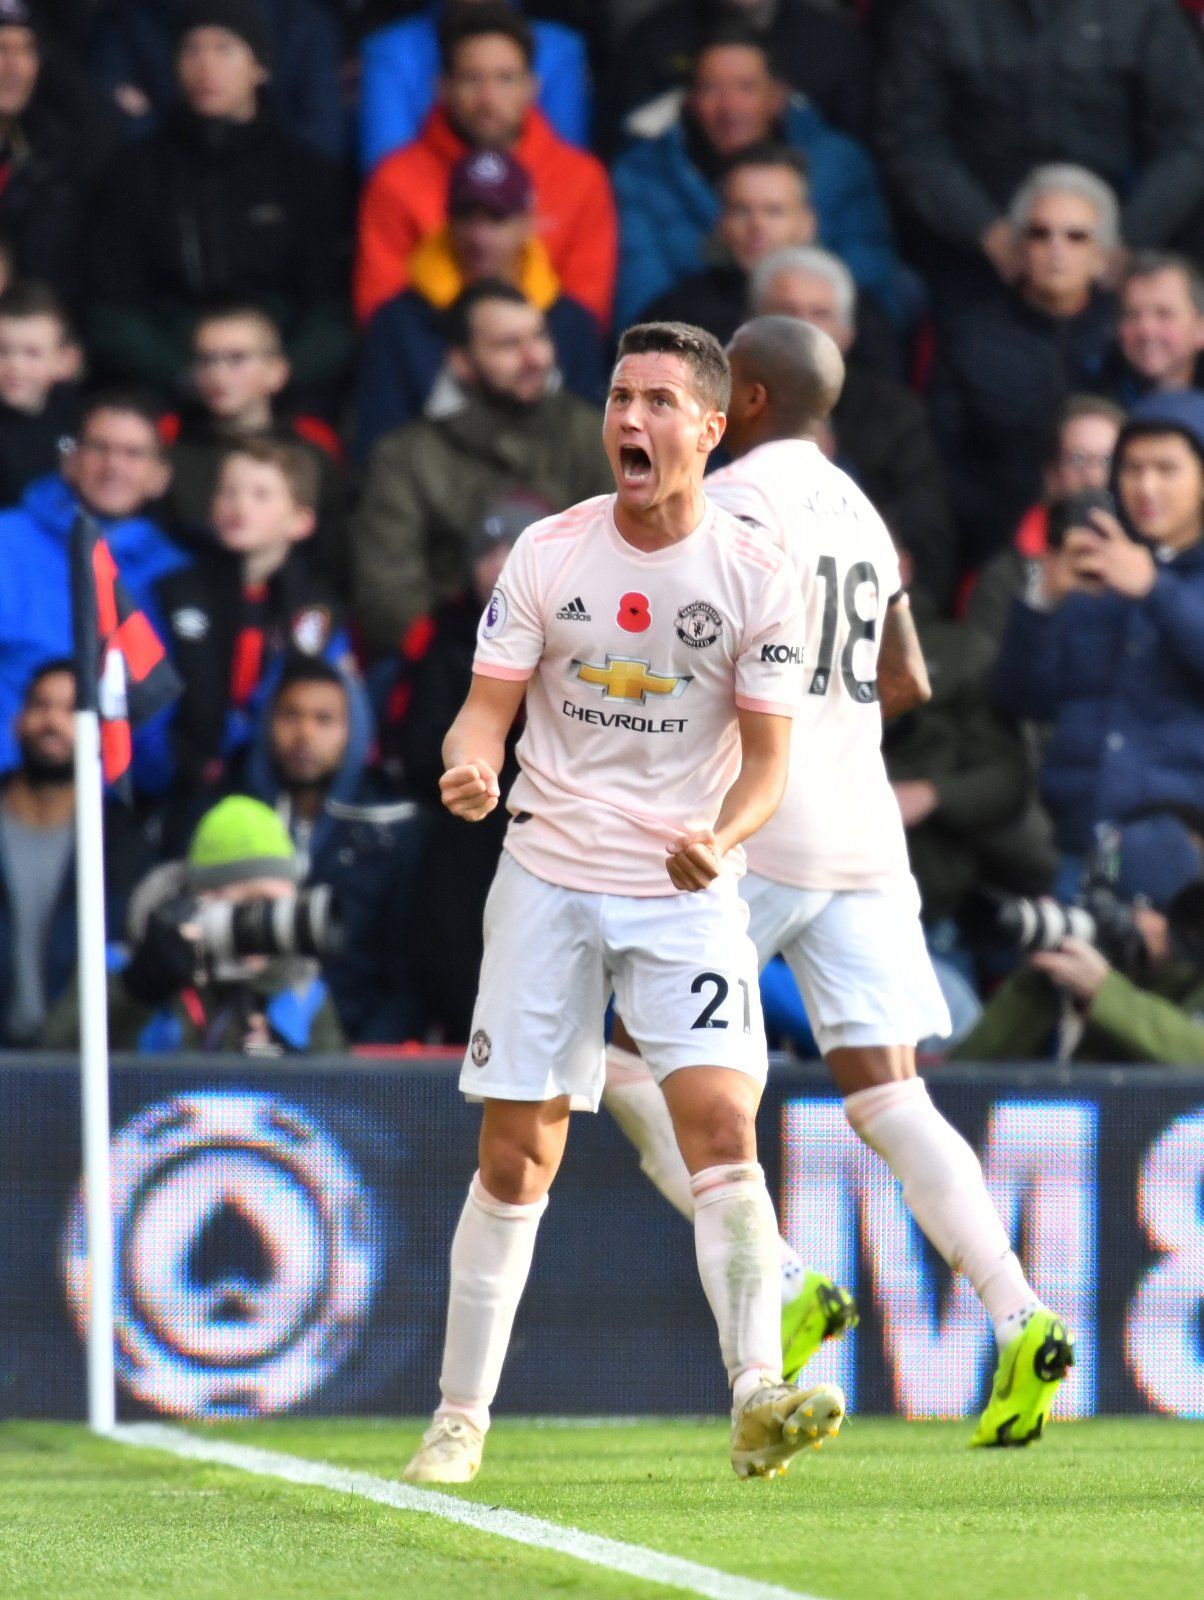 Manchester United's Ander Herrera celebrates after Marcus Rashford scores the winning goal against Bournemouth